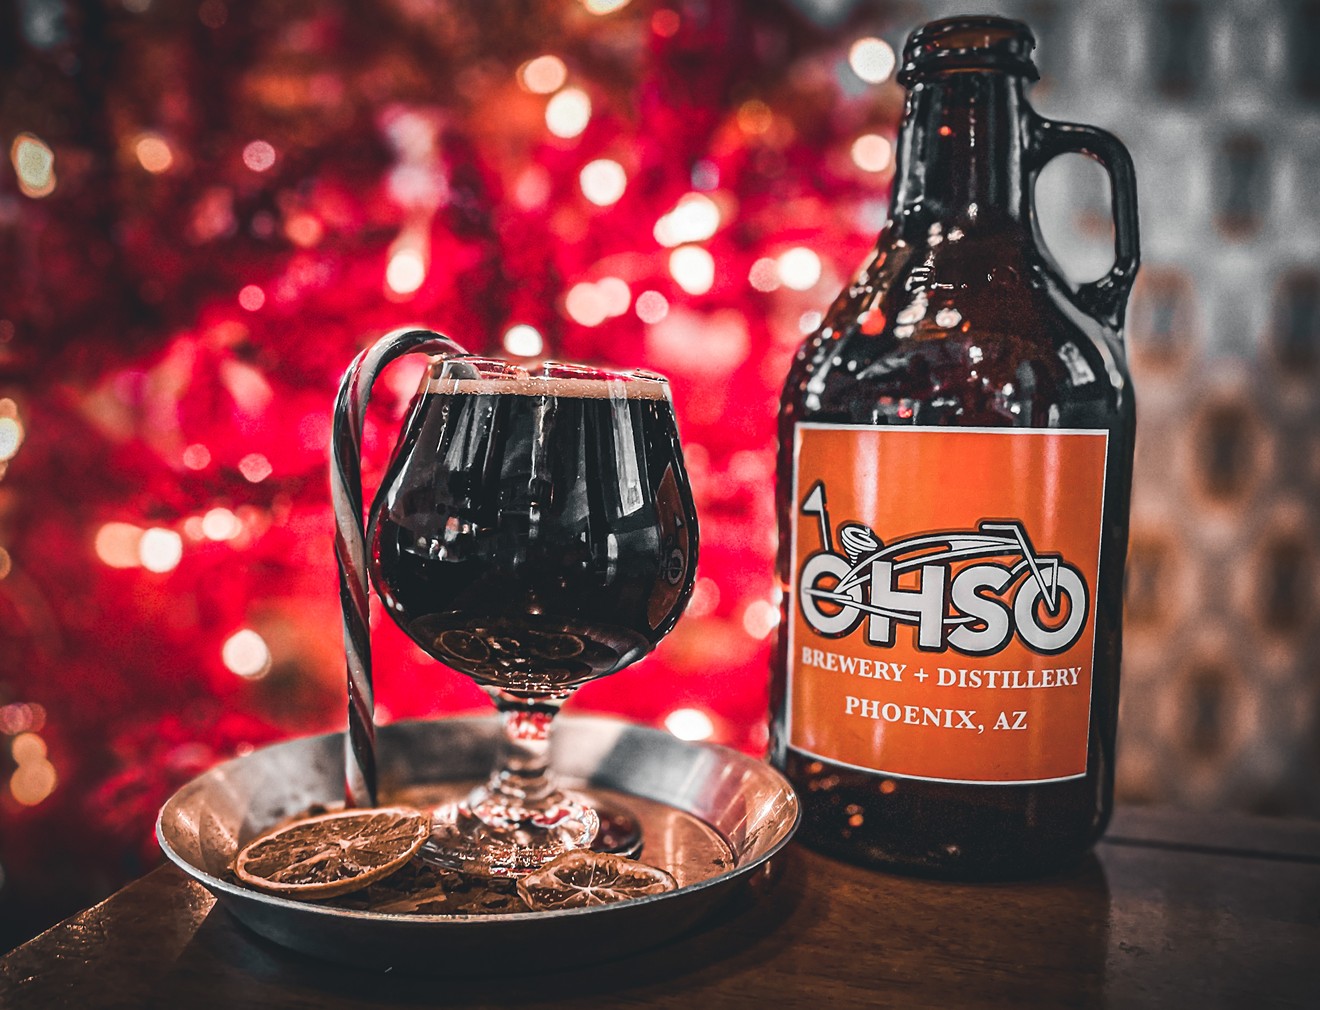 Add spirit to your holidays with wintry-flavored beers from local craft brewers like O.H.S.O. Brewery + Distillery.